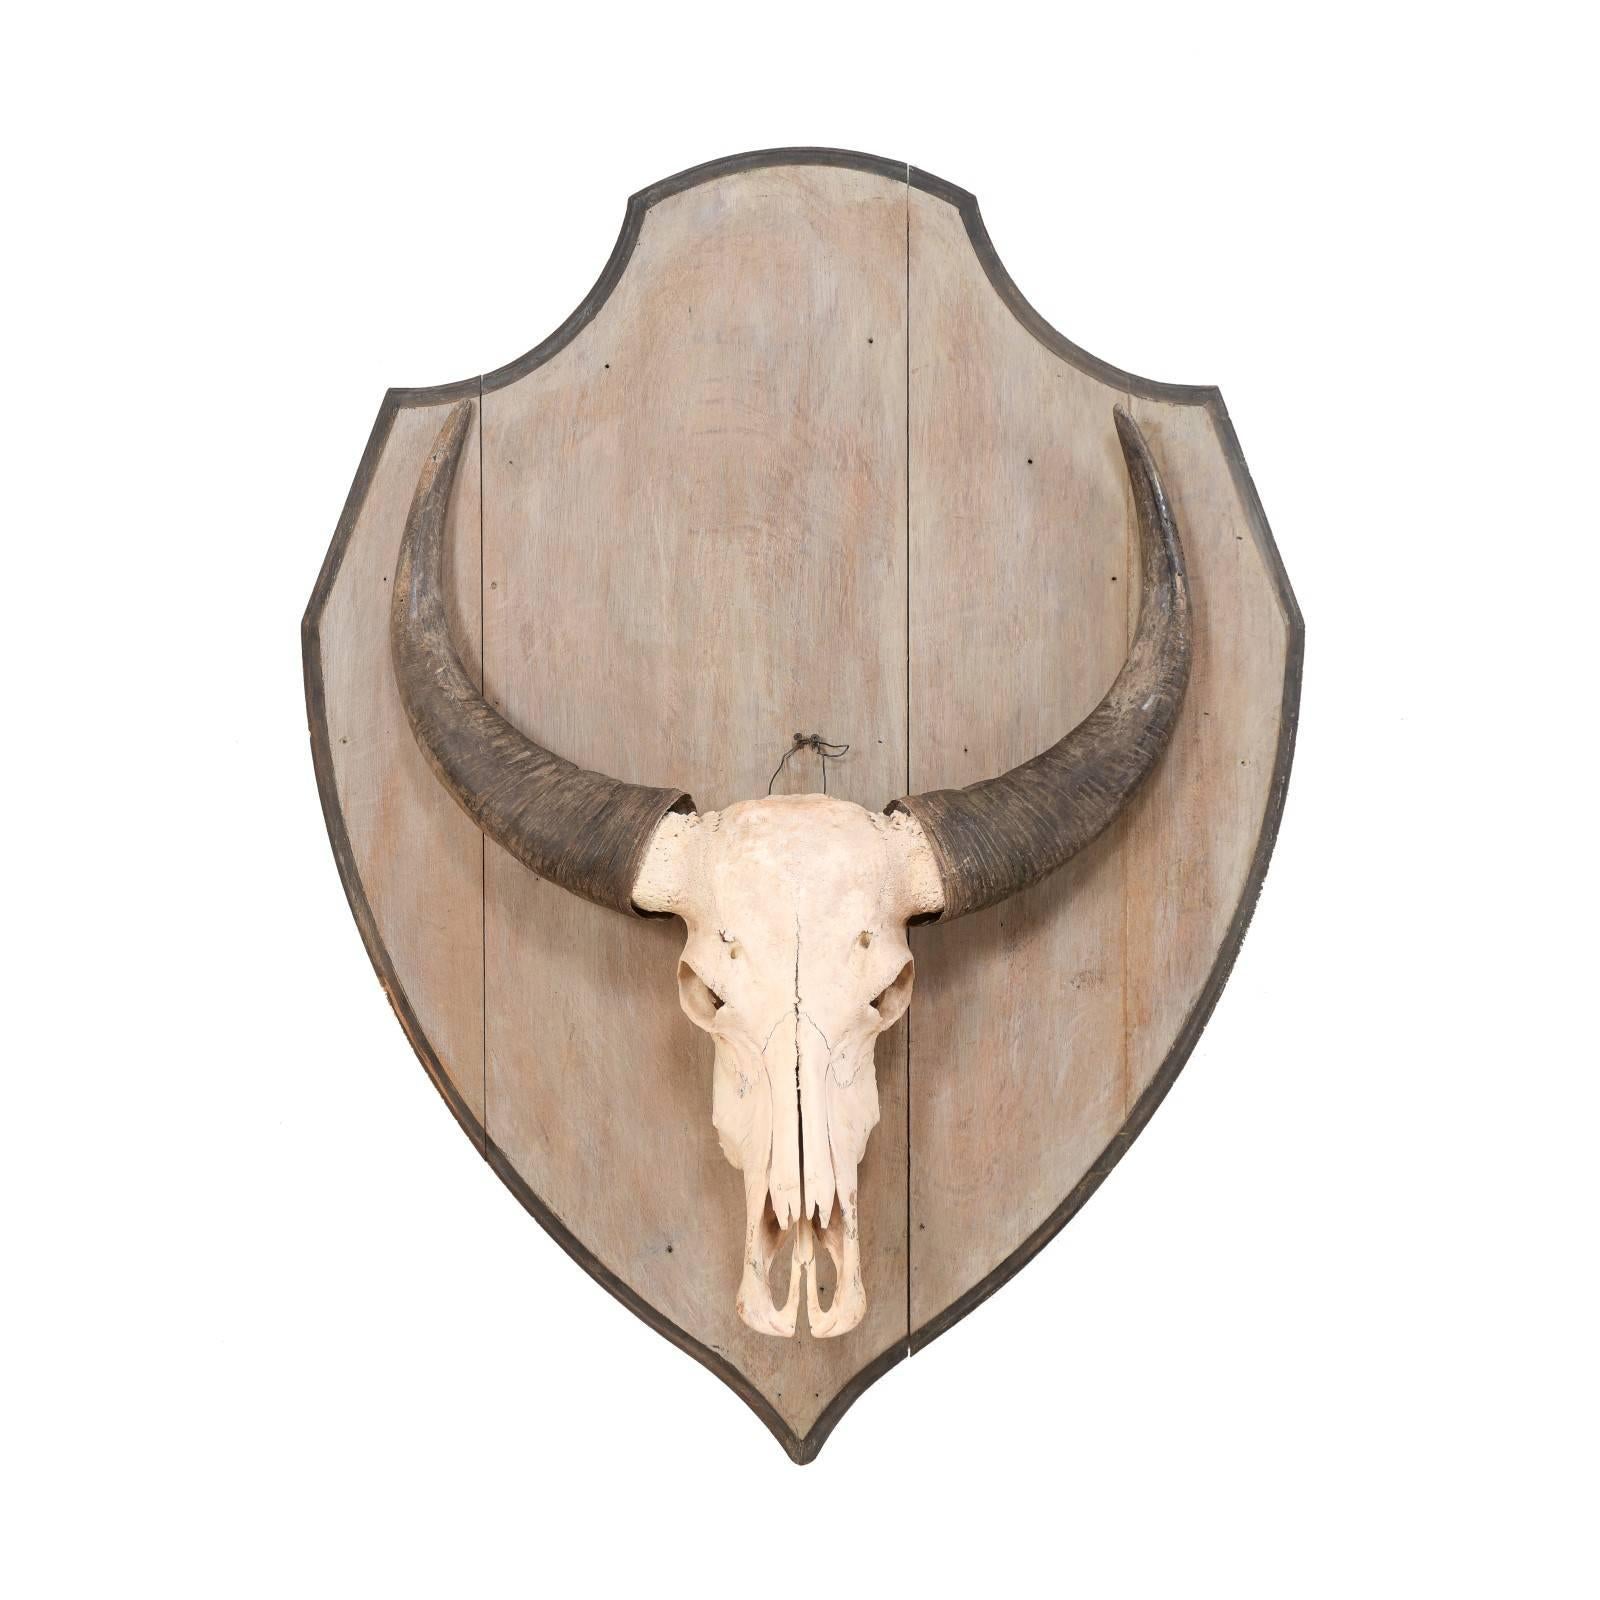 European Vintage Water Buffalo Skull Mounted on Shield-Shaped Wood Plaque For Sale